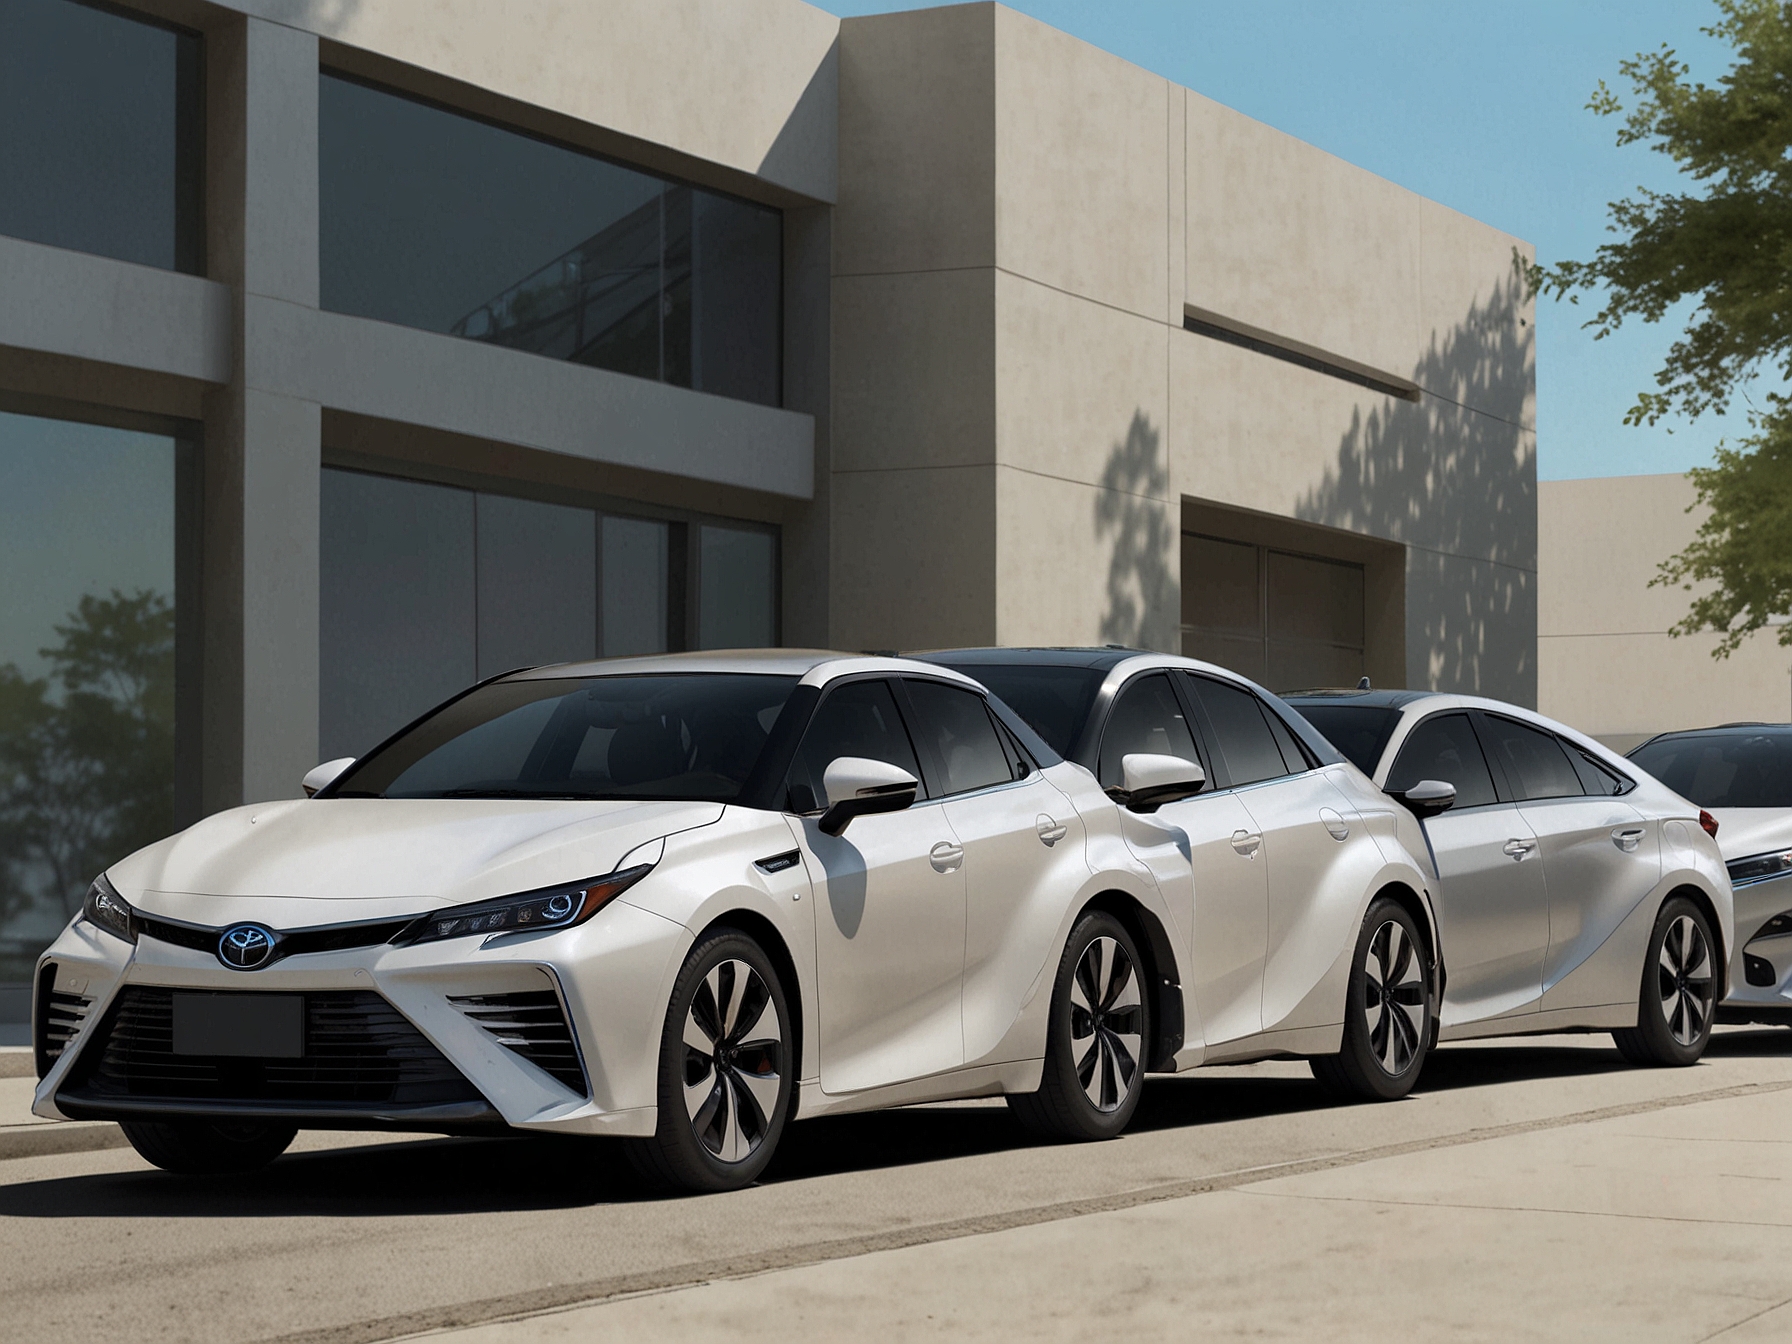 Image of Toyota's latest hybrid and hydrogen fuel cell vehicles displayed at the AGM, representing the company's commitment to diversified sustainable mobility technologies.